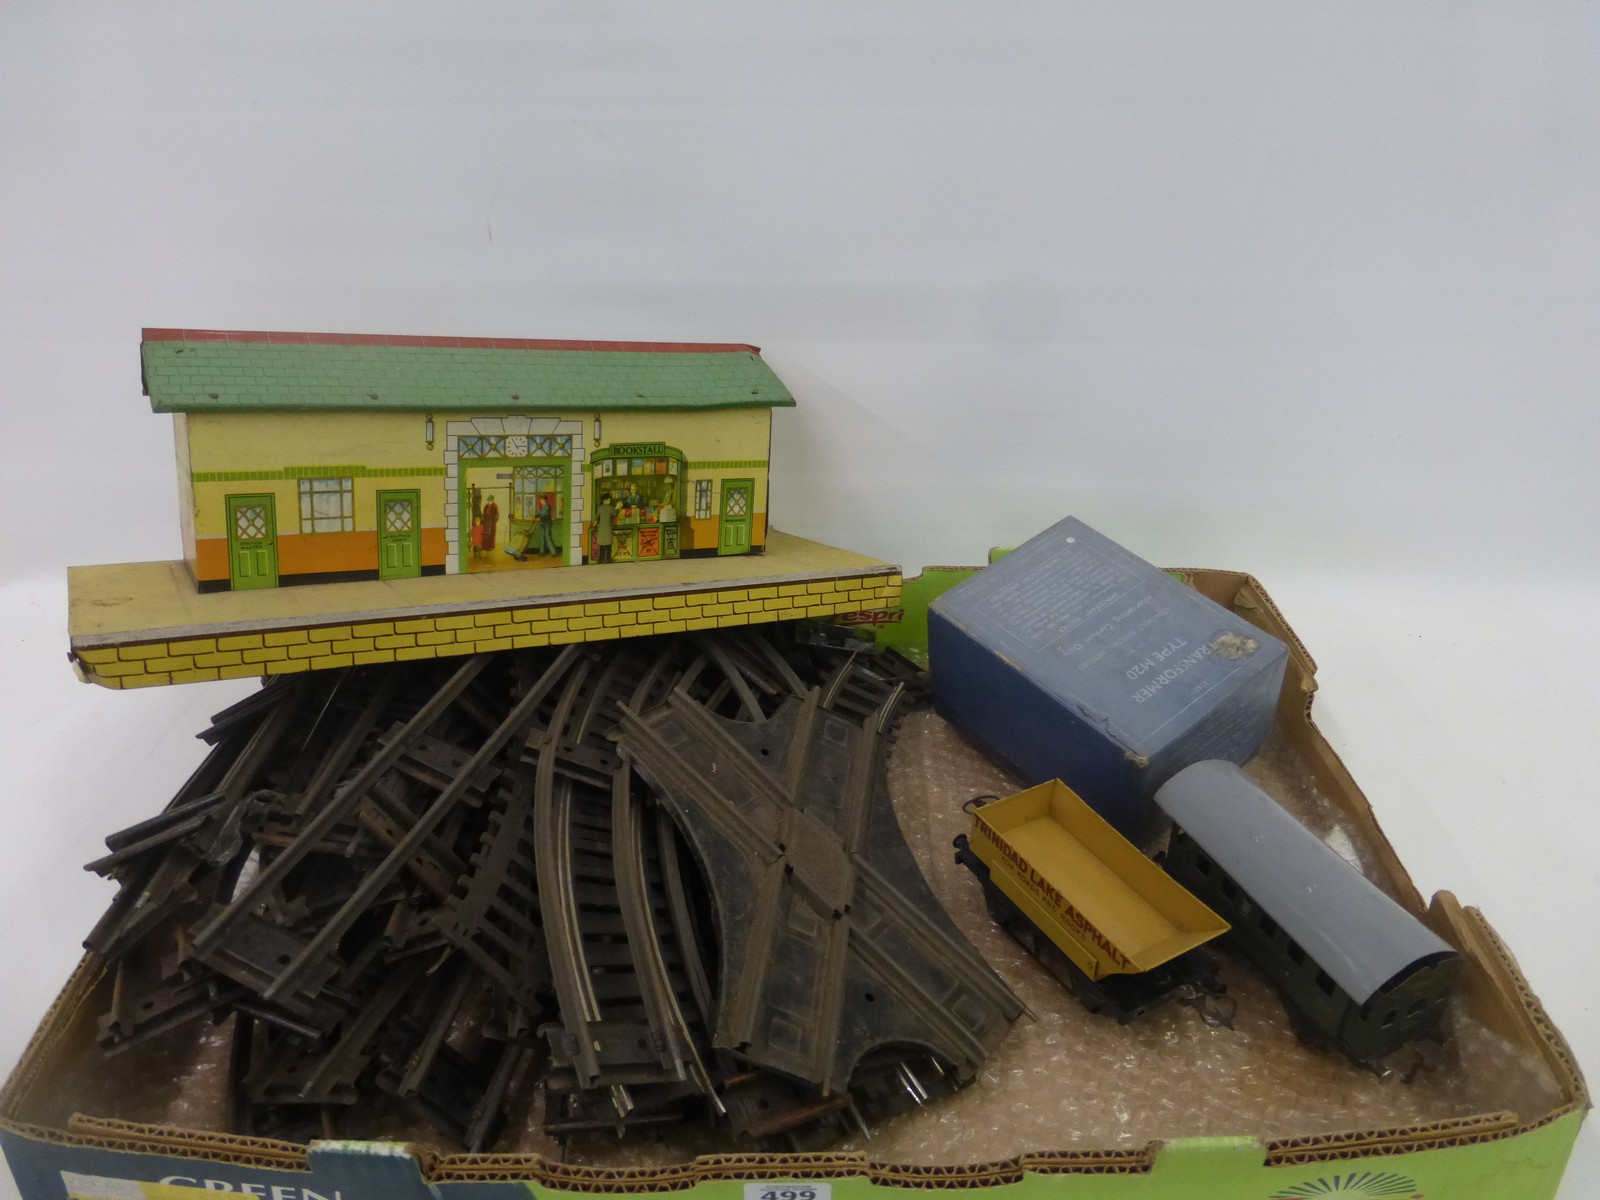 An assortment of 0 gauge track, a Fleischmann tin plate carriage made in the U.S. Zone Germany, a